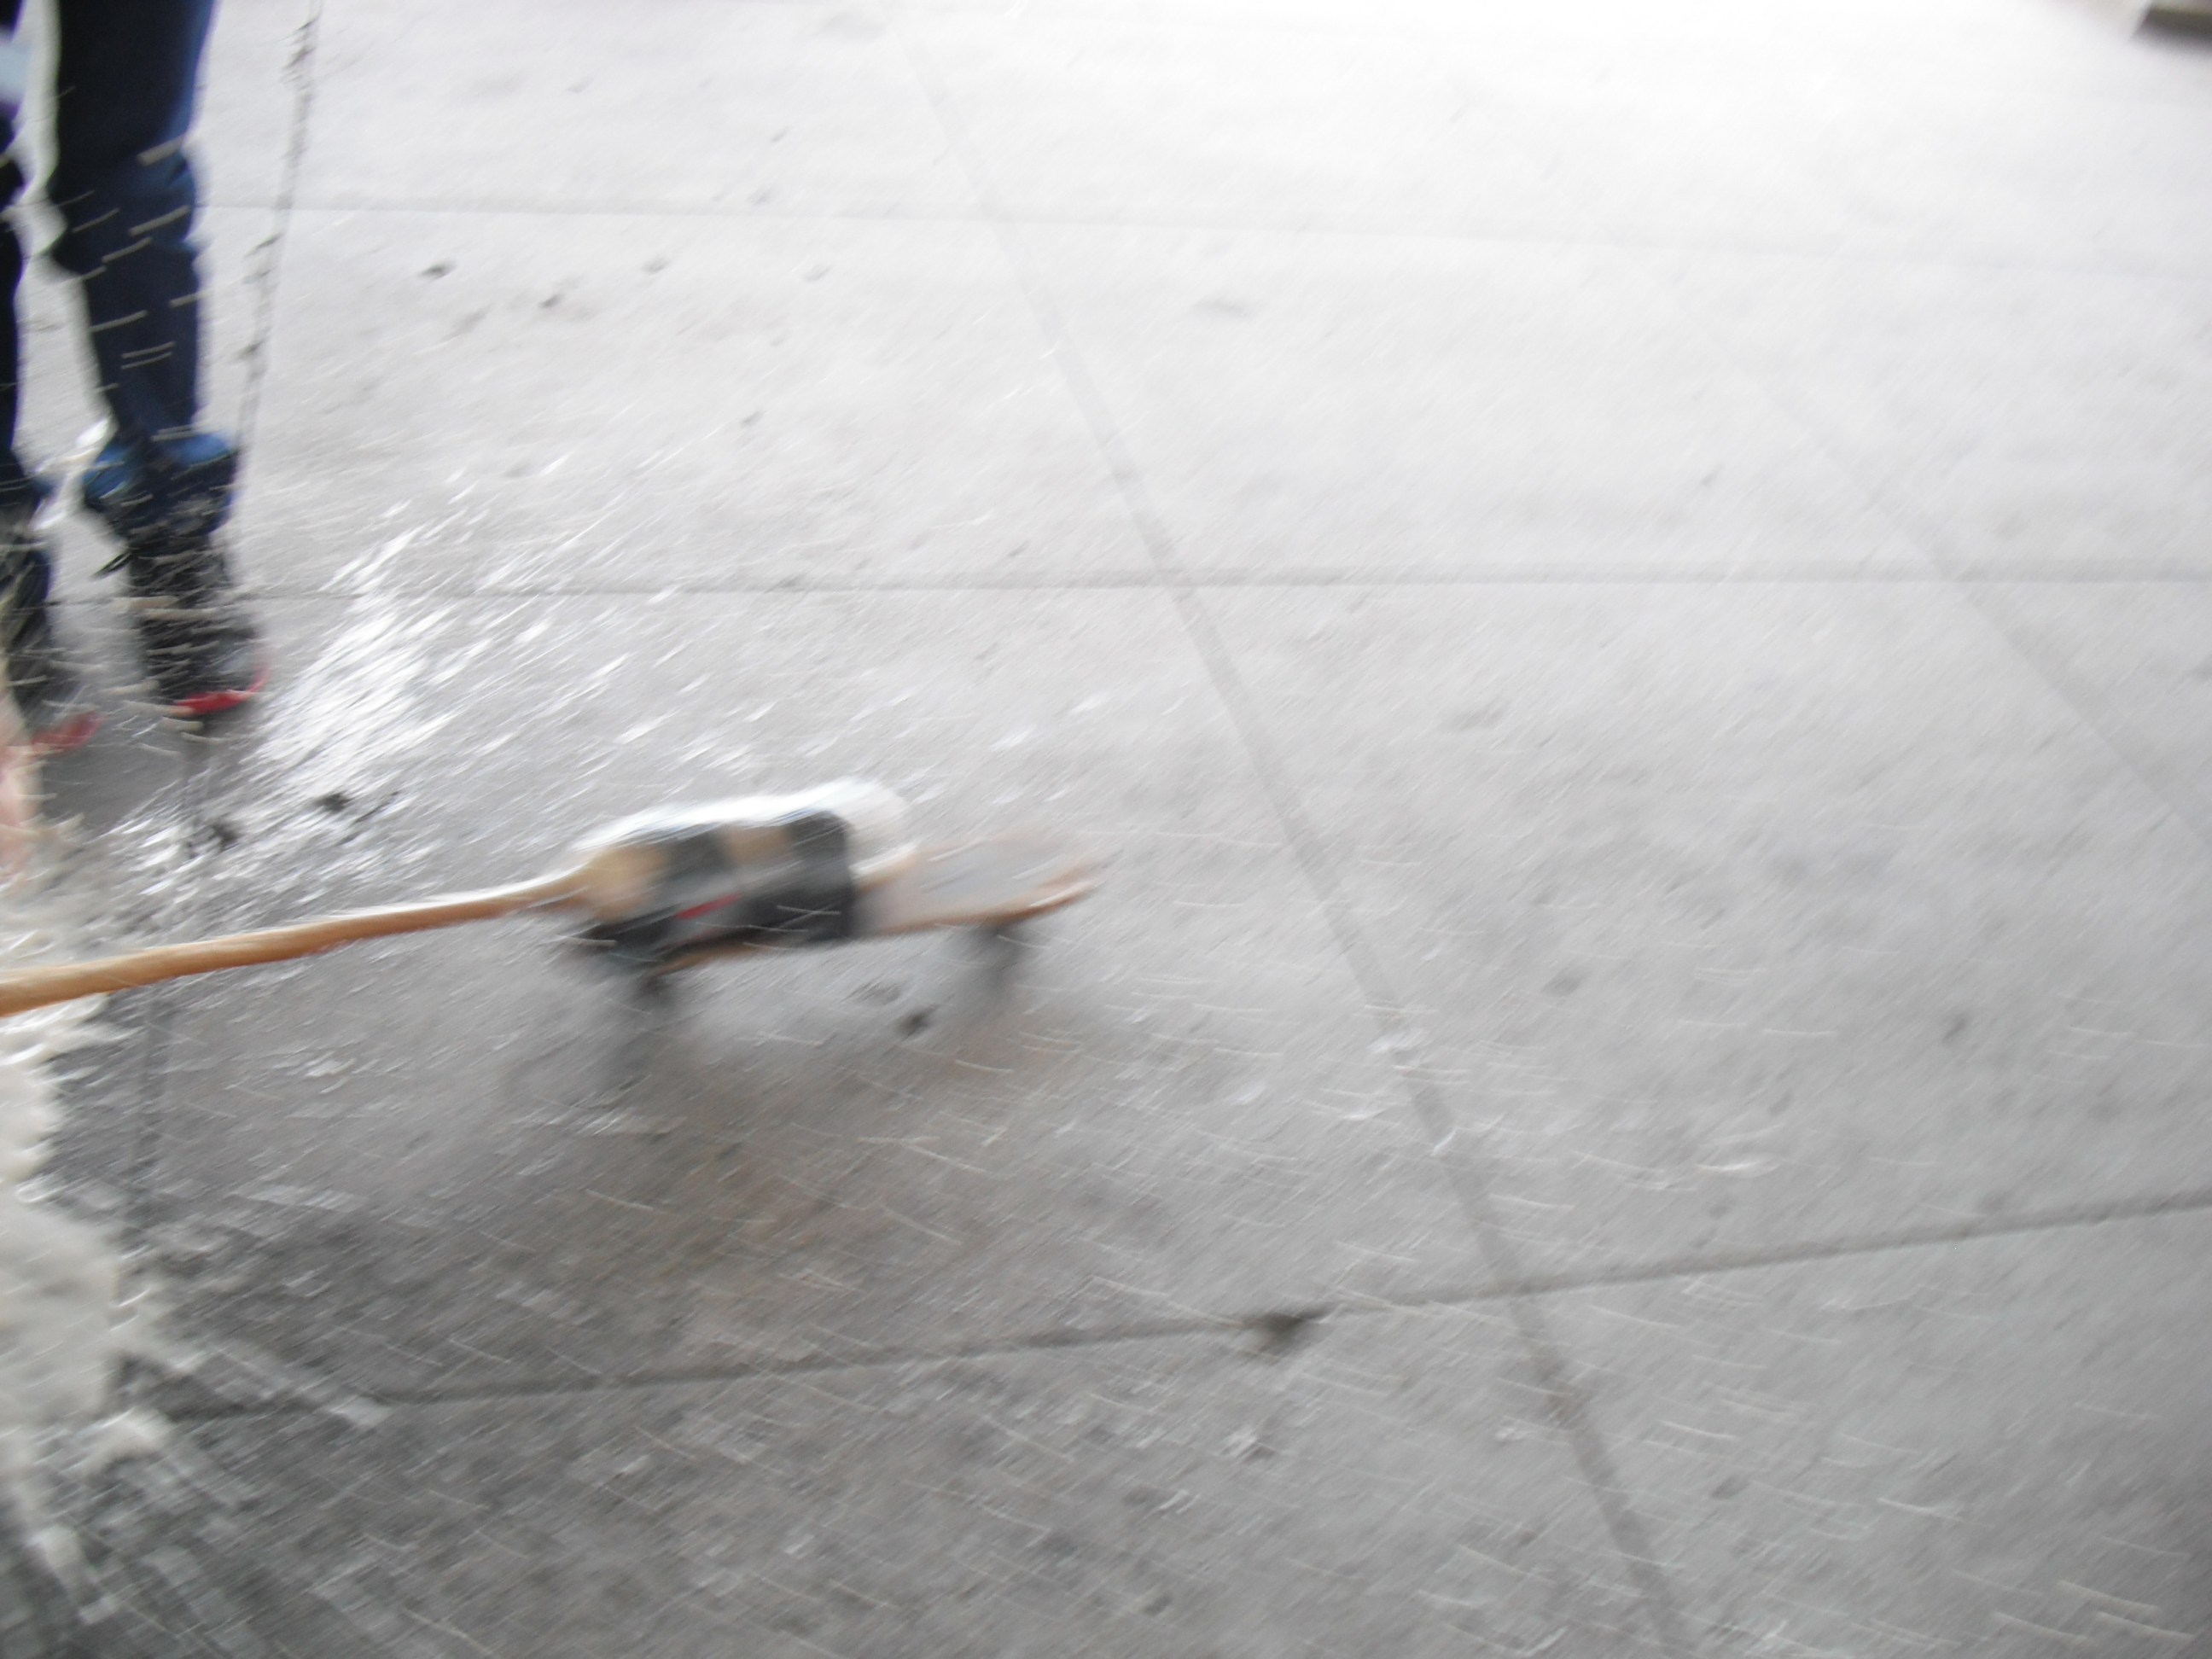 Mentos-and-Coke Propelled Skateboard